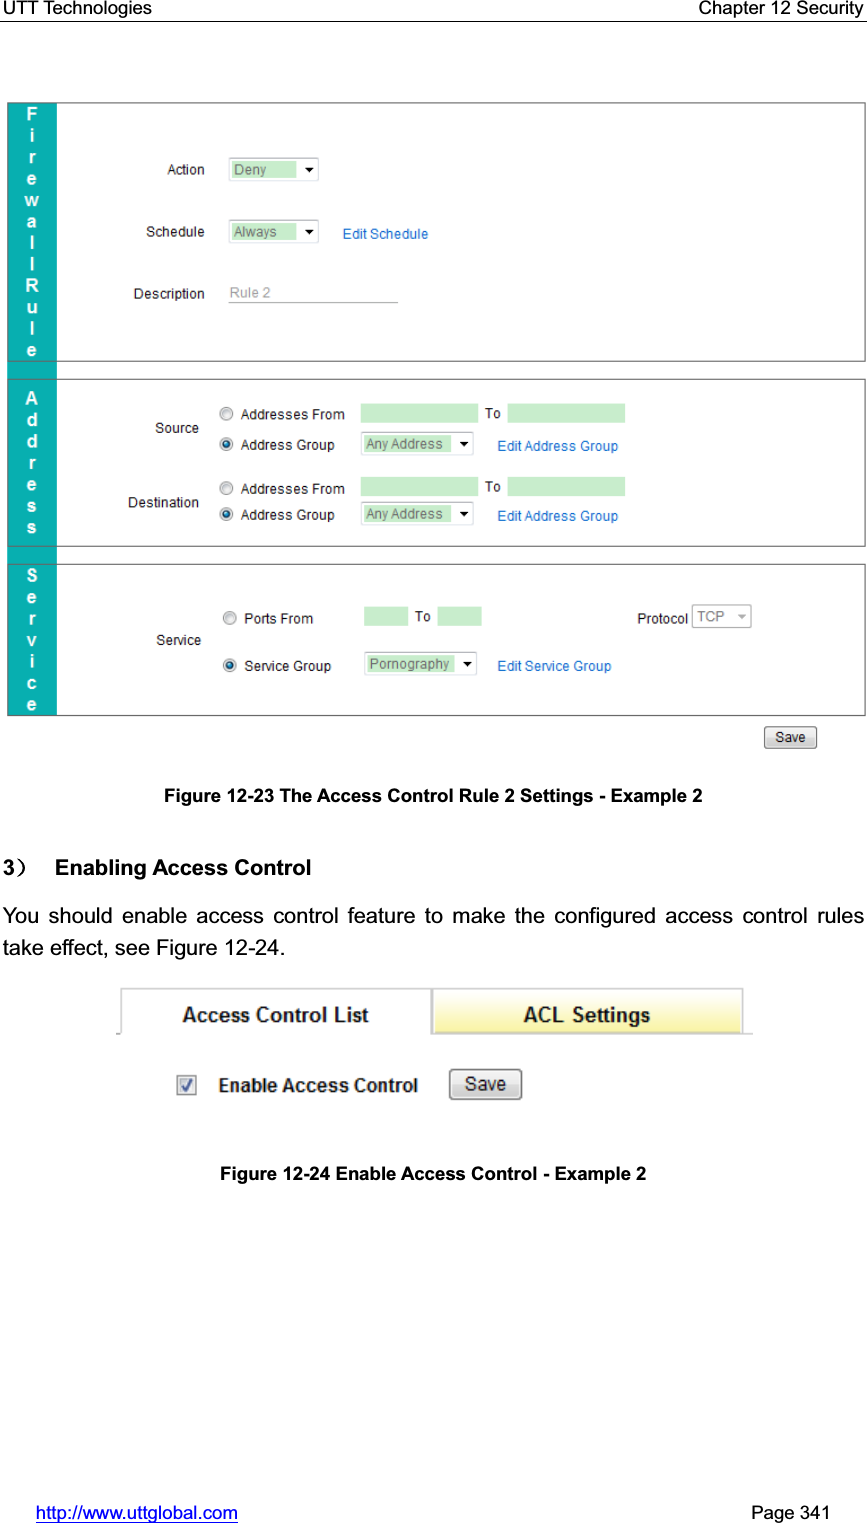 UTT Technologies    Chapter 12 Security   http://www.uttglobal.com                                                       Page 341 Figure 12-23 The Access Control Rule 2 Settings - Example 2 3˅ Enabling Access Control You should enable access control feature to make the configured access control rules take effect, see Figure 12-24.   Figure 12-24 Enable Access Control - Example 2 